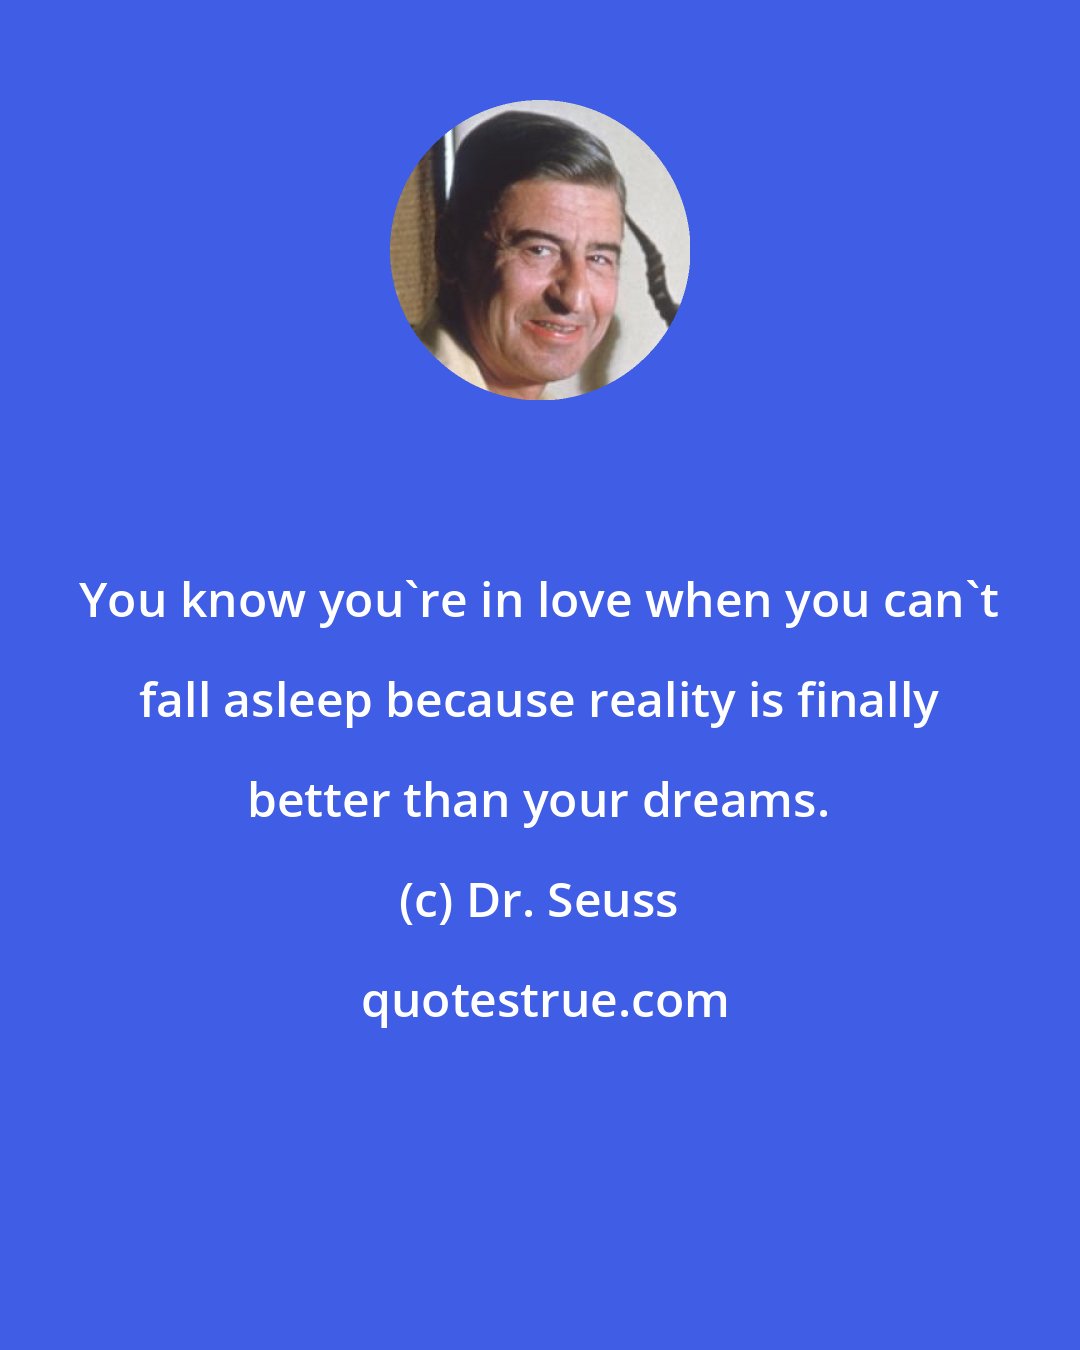 Dr. Seuss: You know you're in love when you can't fall asleep because reality is finally better than your dreams.